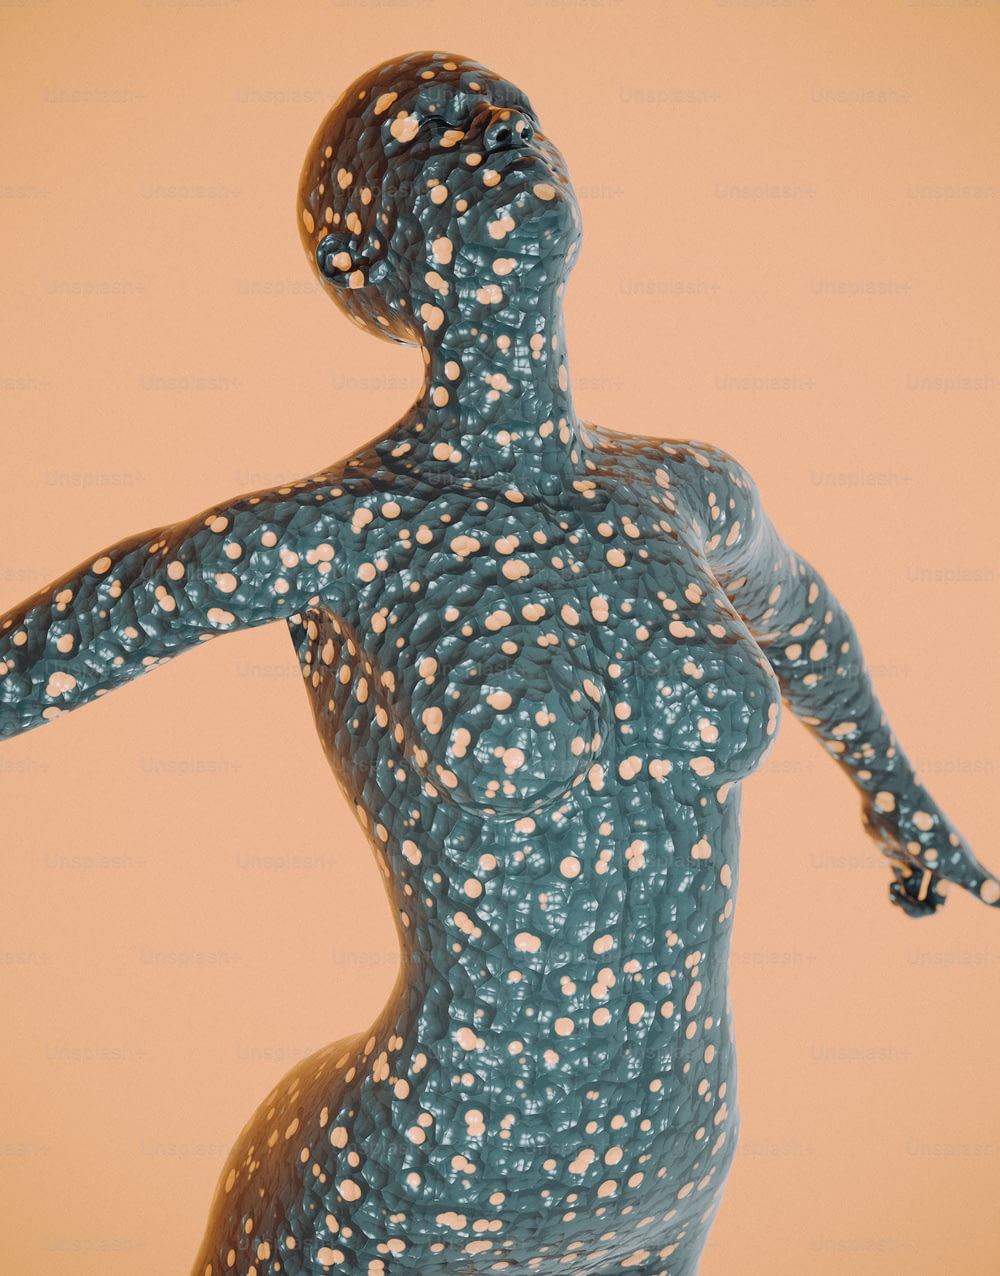 a sculpture of a woman with dots on her body